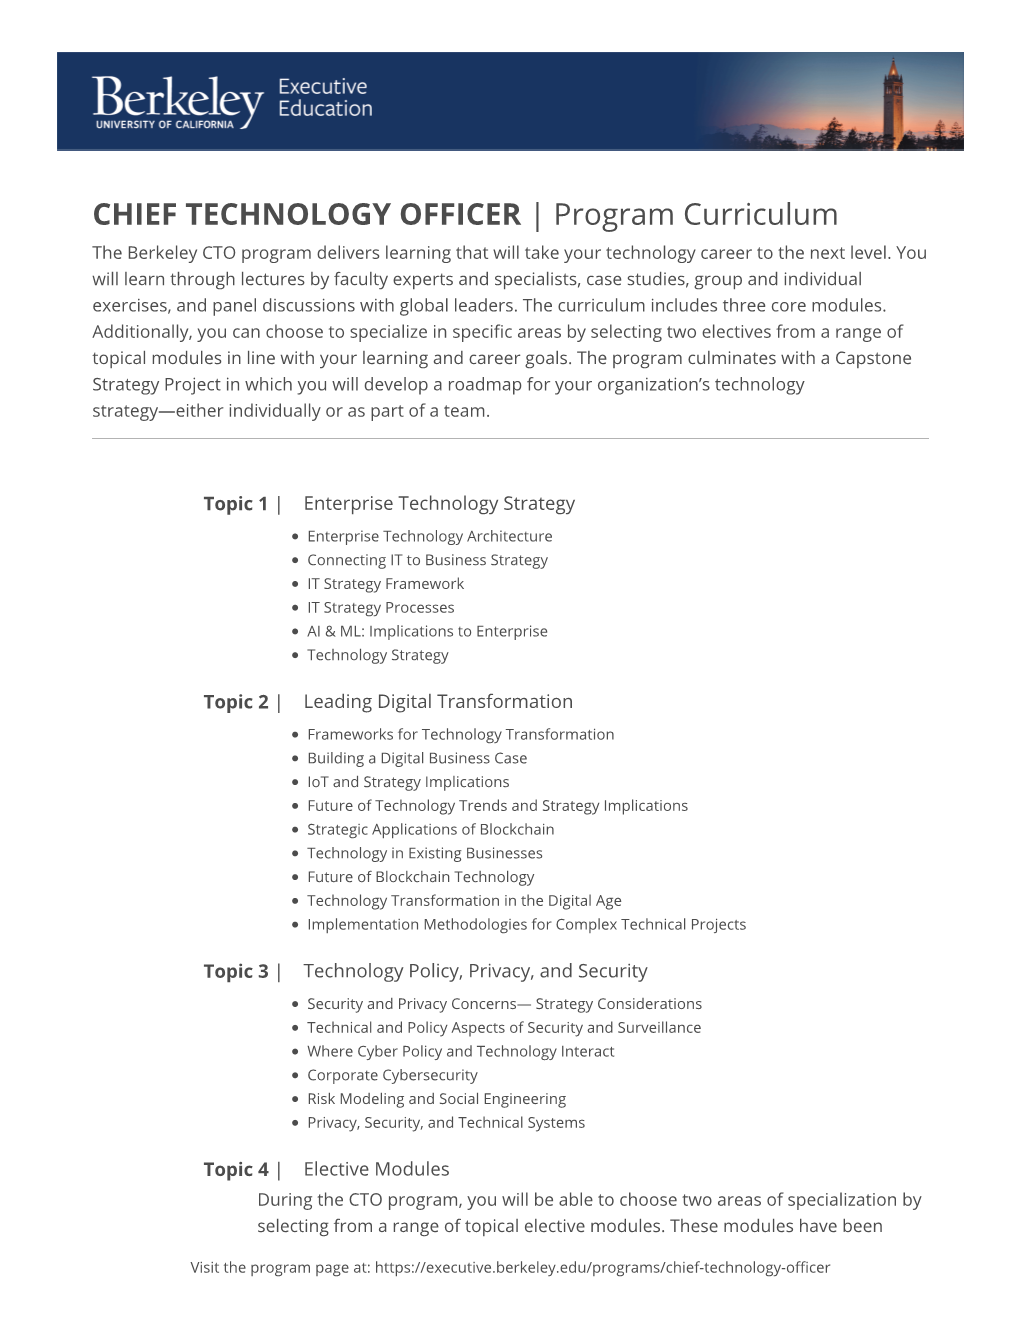 CHIEF TECHNOLOGY OFFICER | Program Curriculum the Berkeley CTO Program Delivers Learning That Will Take Your Technology Career to the Next Level